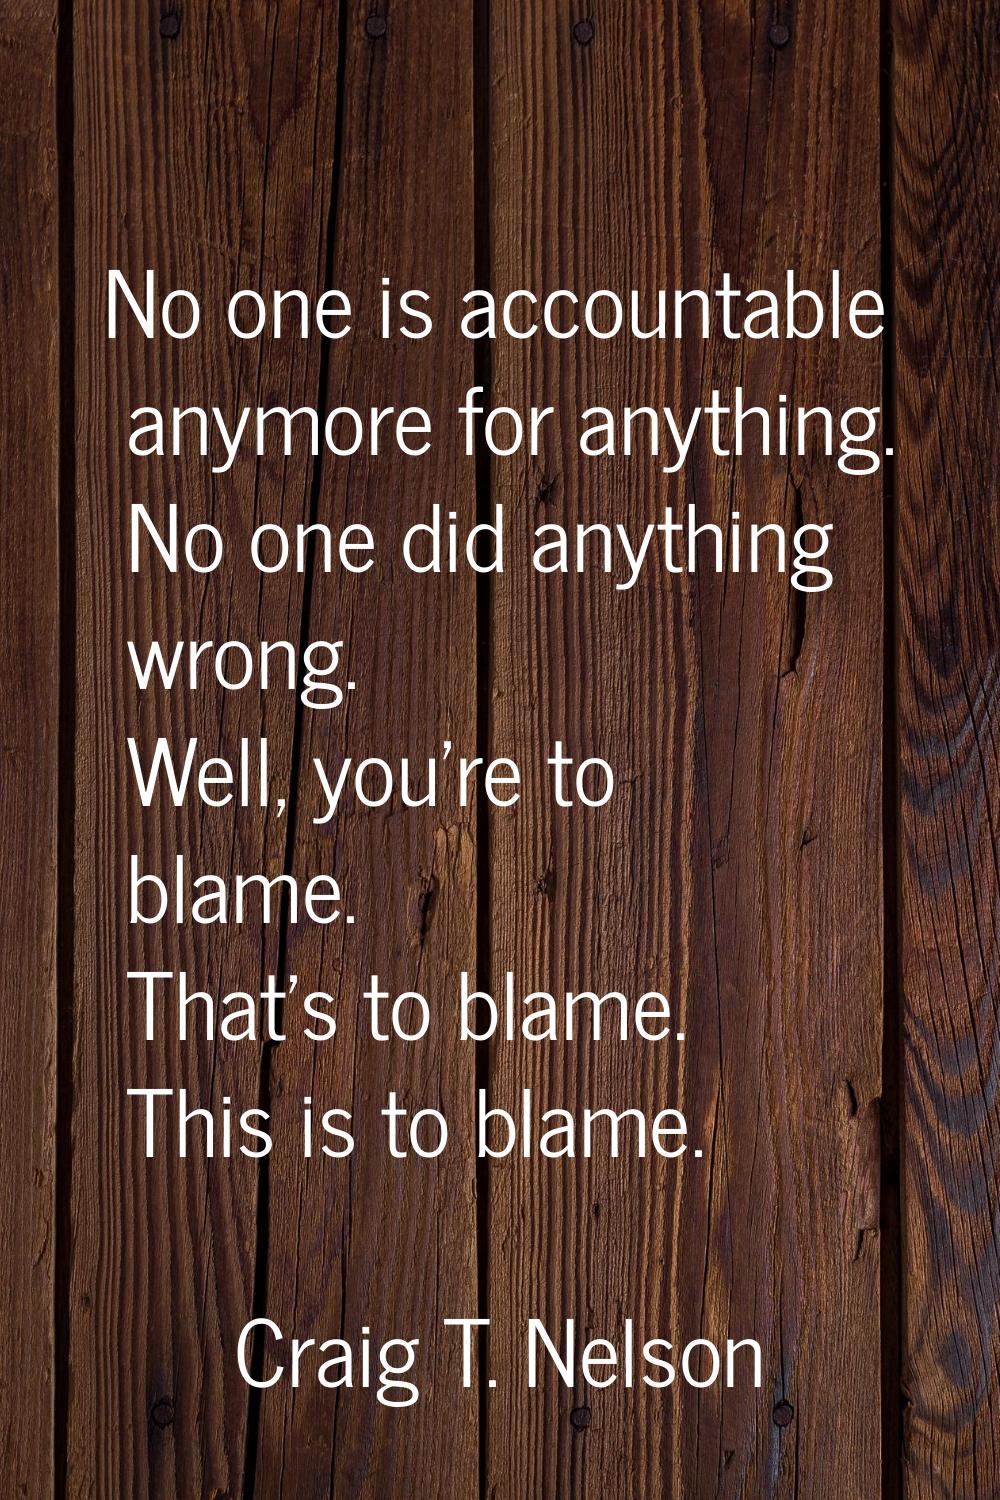 No one is accountable anymore for anything. No one did anything wrong. Well, you're to blame. That'